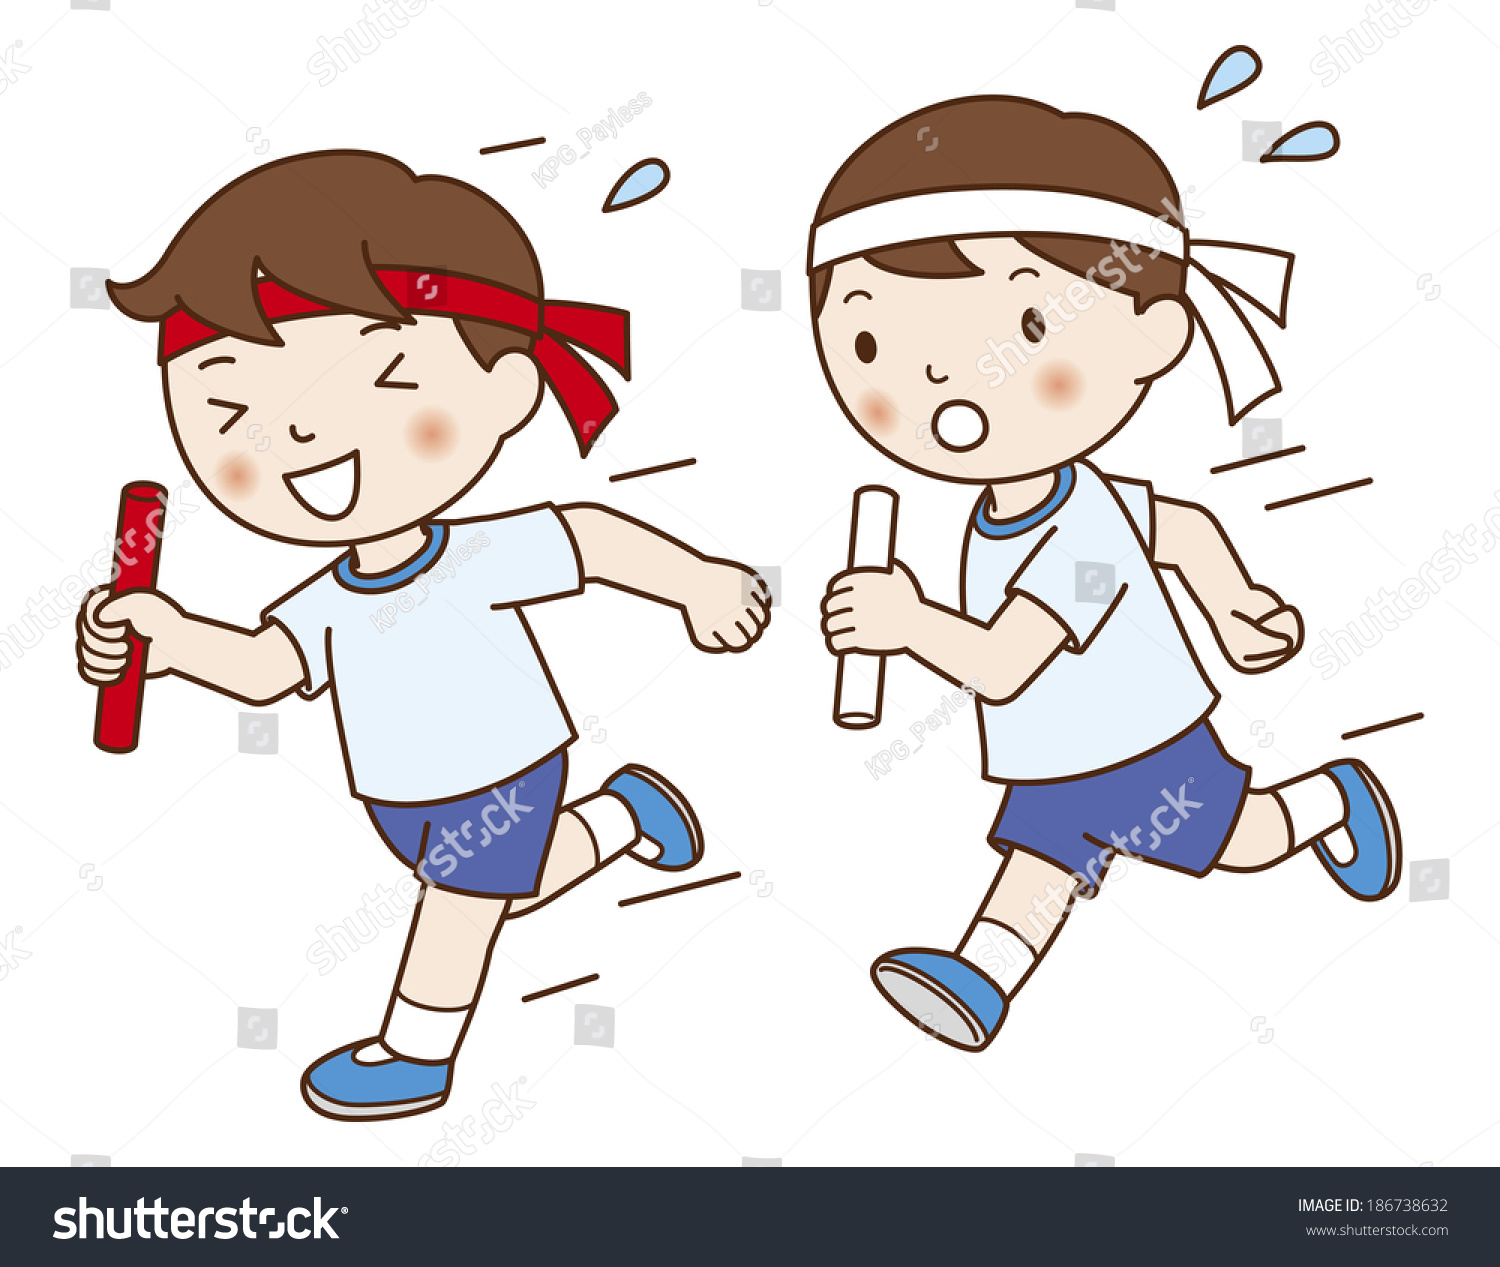 clipart sports day - photo #20